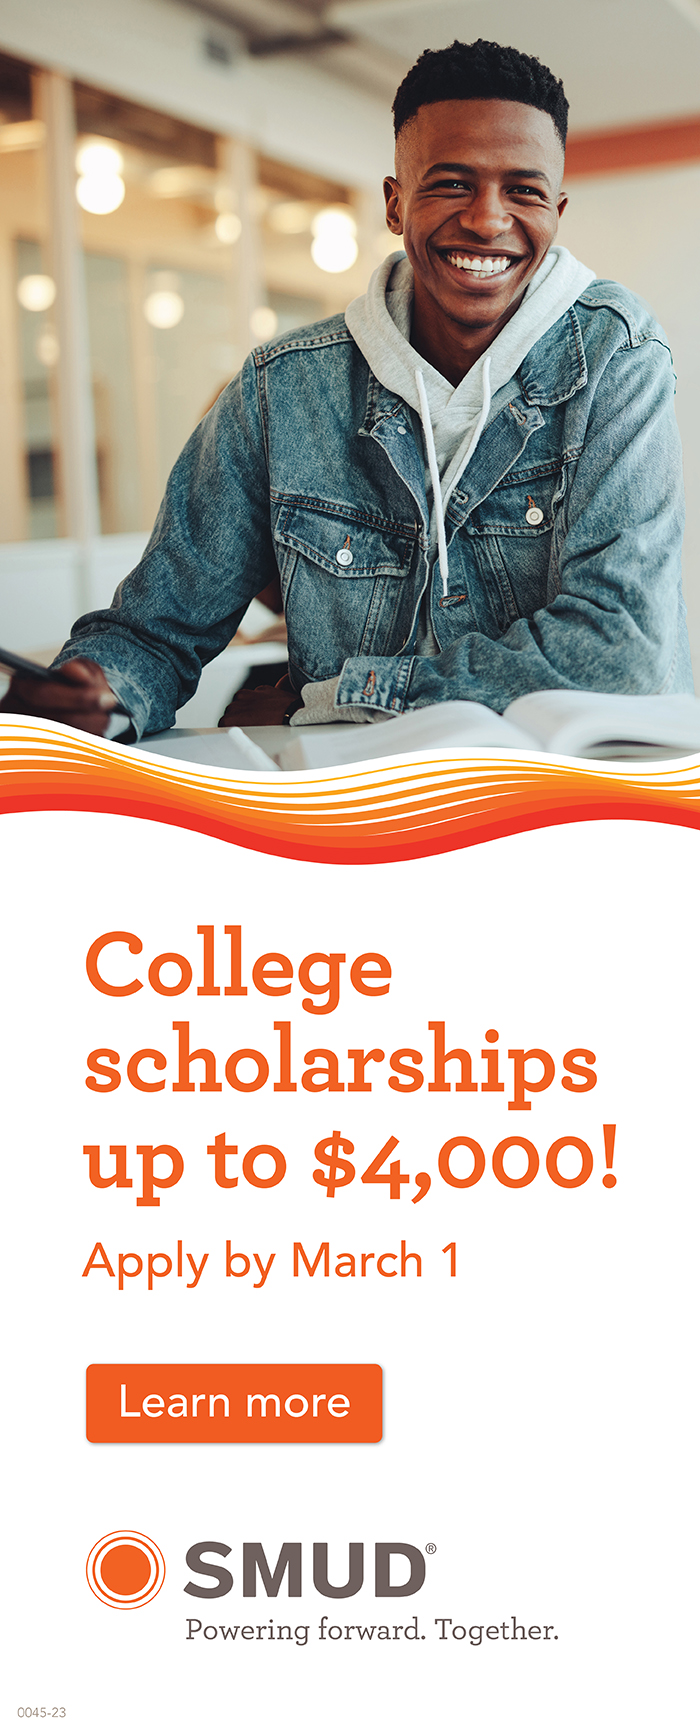 College scholarships up to $4,000 from SMUD. Apply today!